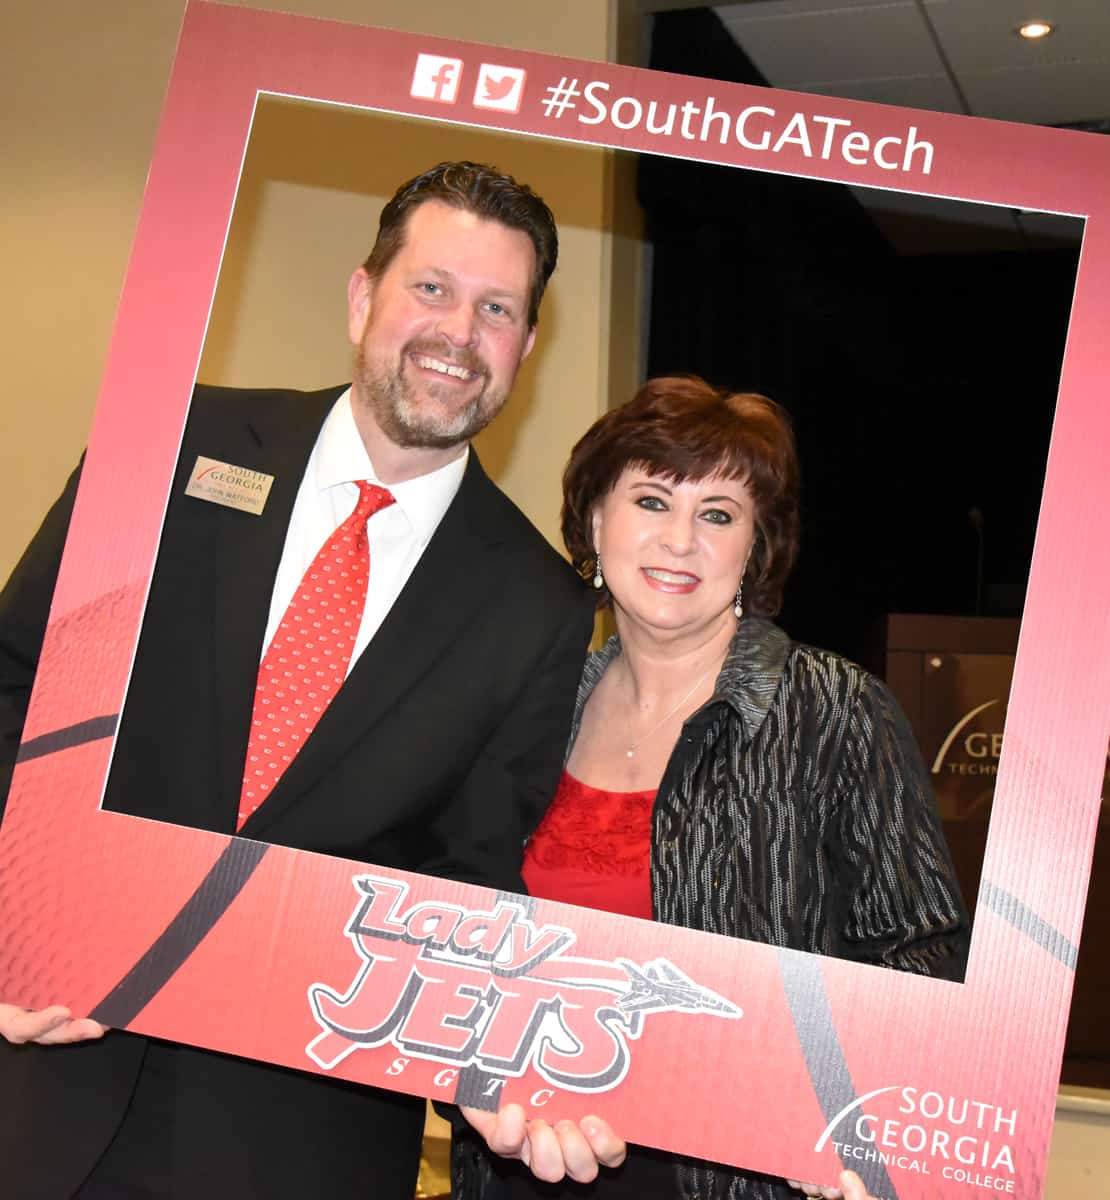 South Georgia Technical College President Dr. John Watford and his wife, Barbara, are shown above “Taking Off with South Georgia Technical College” by posing for a selfie in the Jets and Lady Jets social media frames.